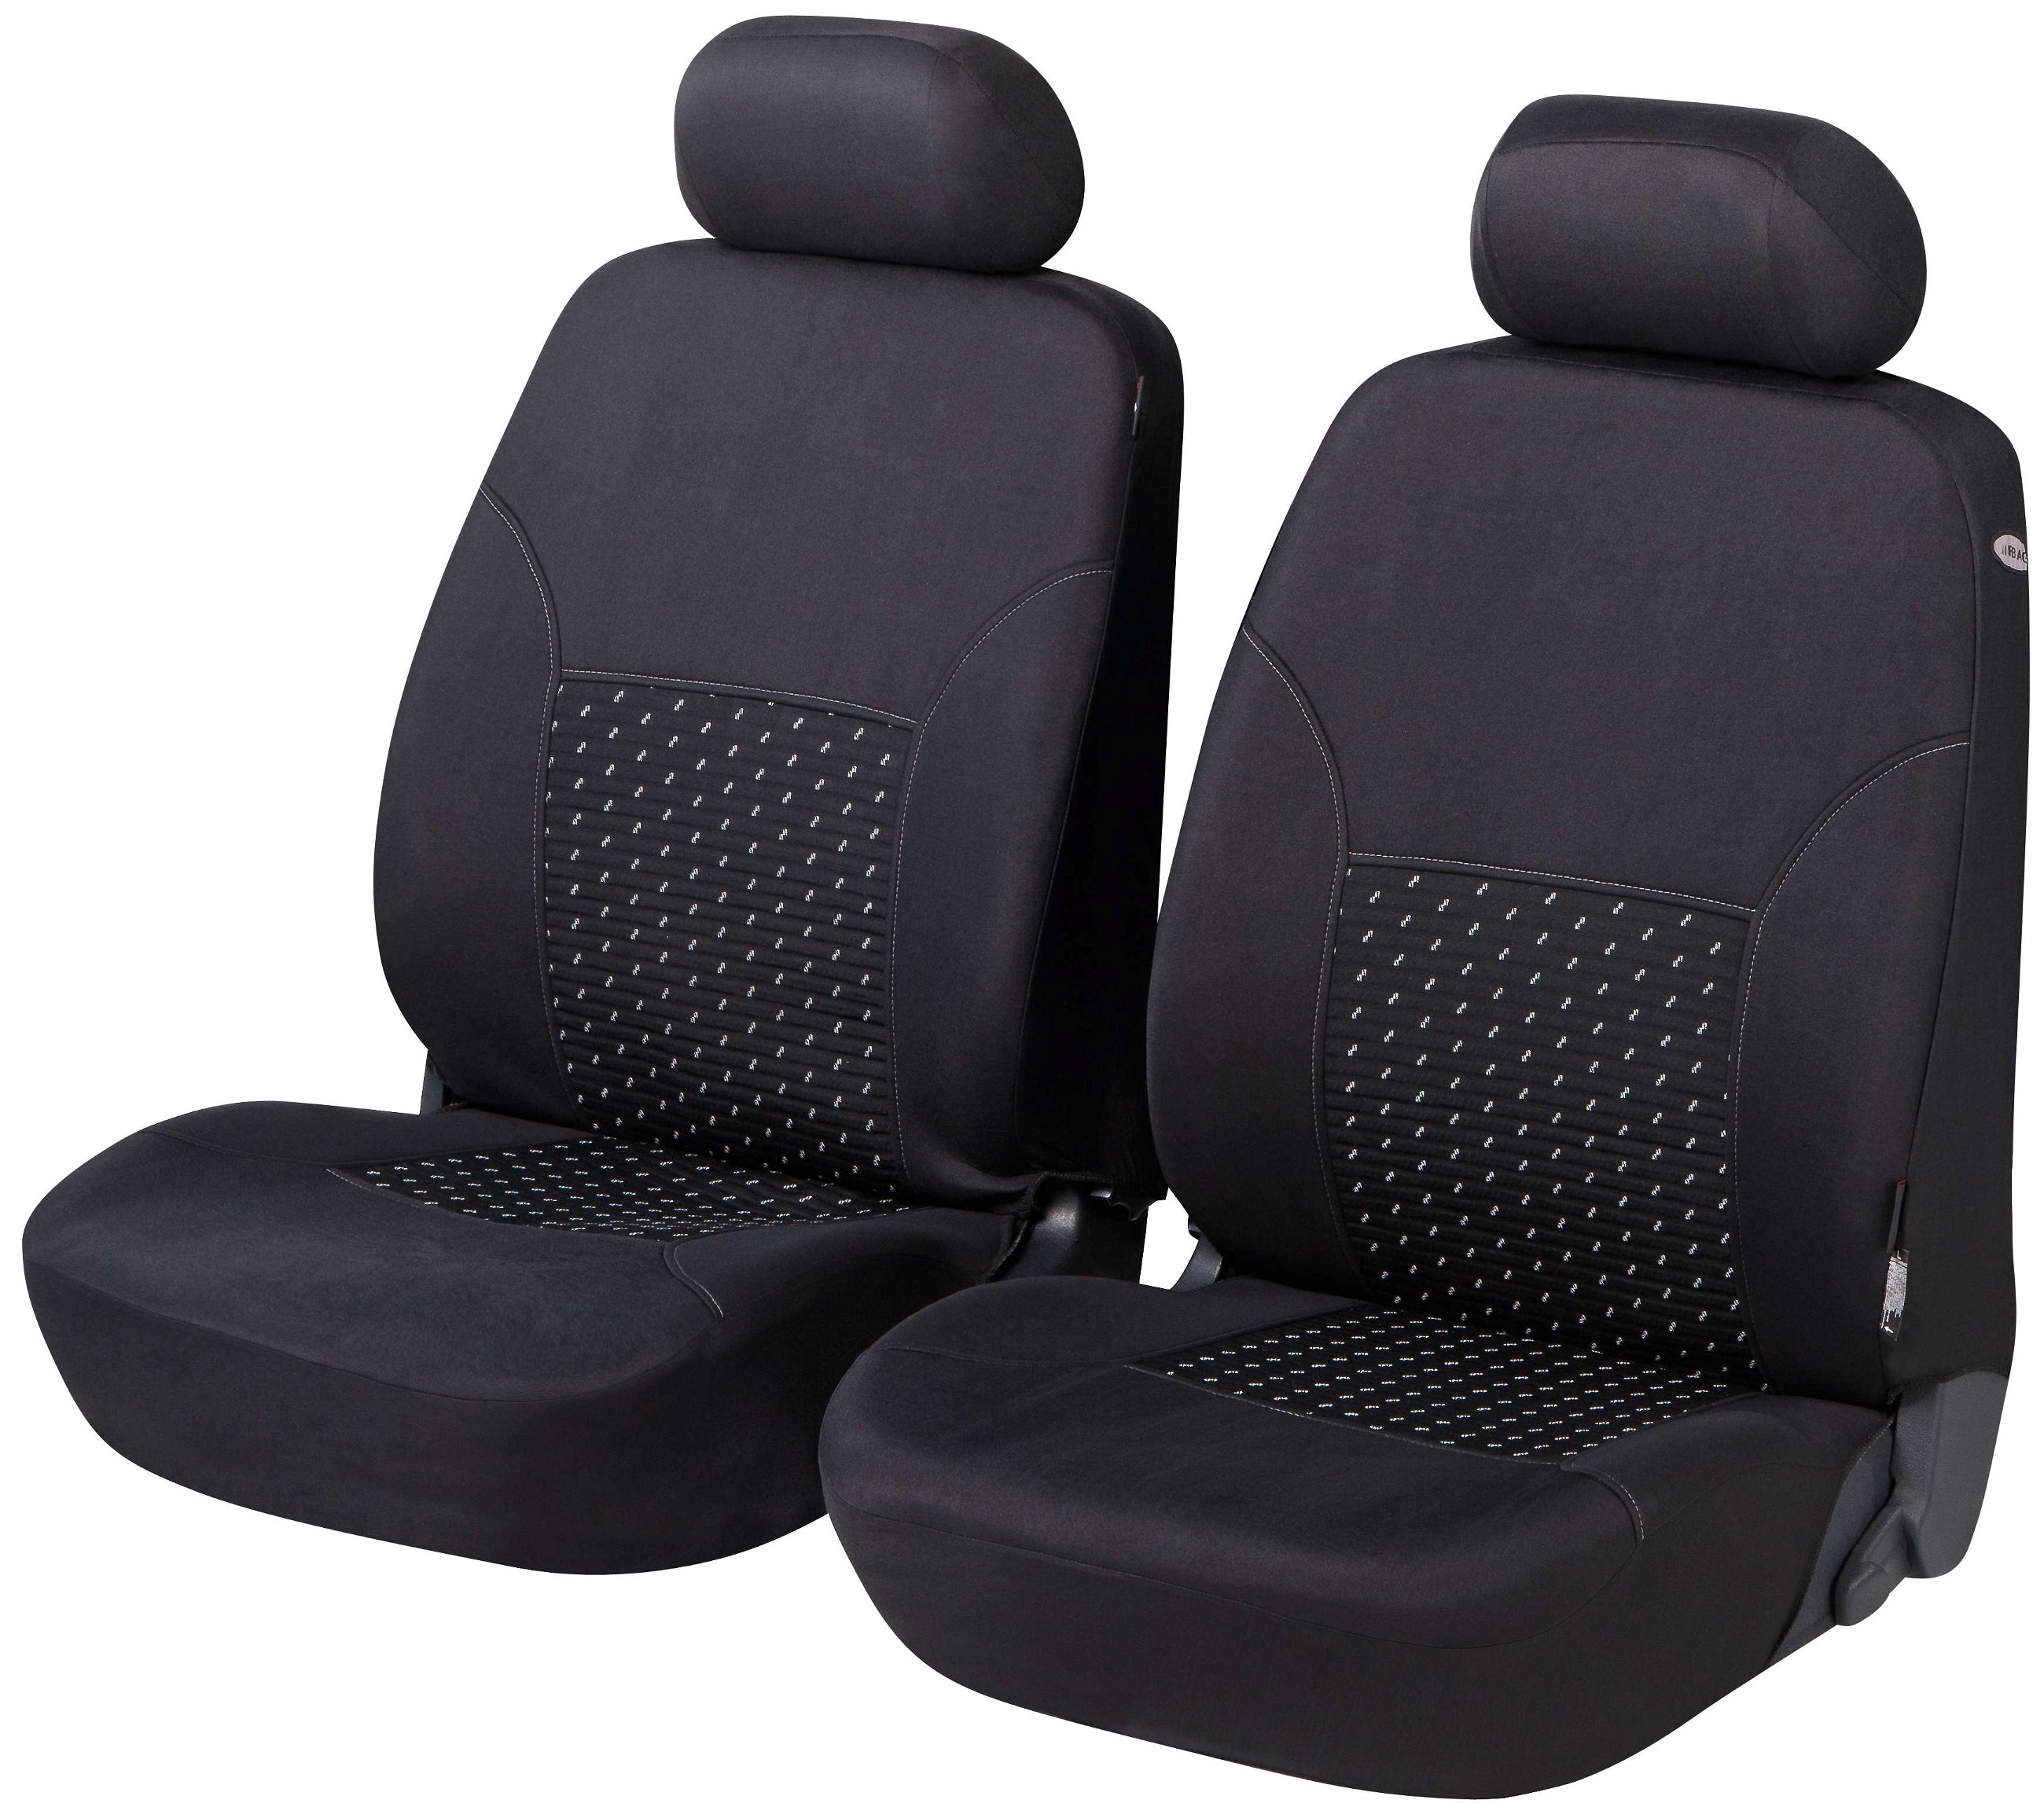 Car Seat cover DotSpot grey black Premium for two front seats